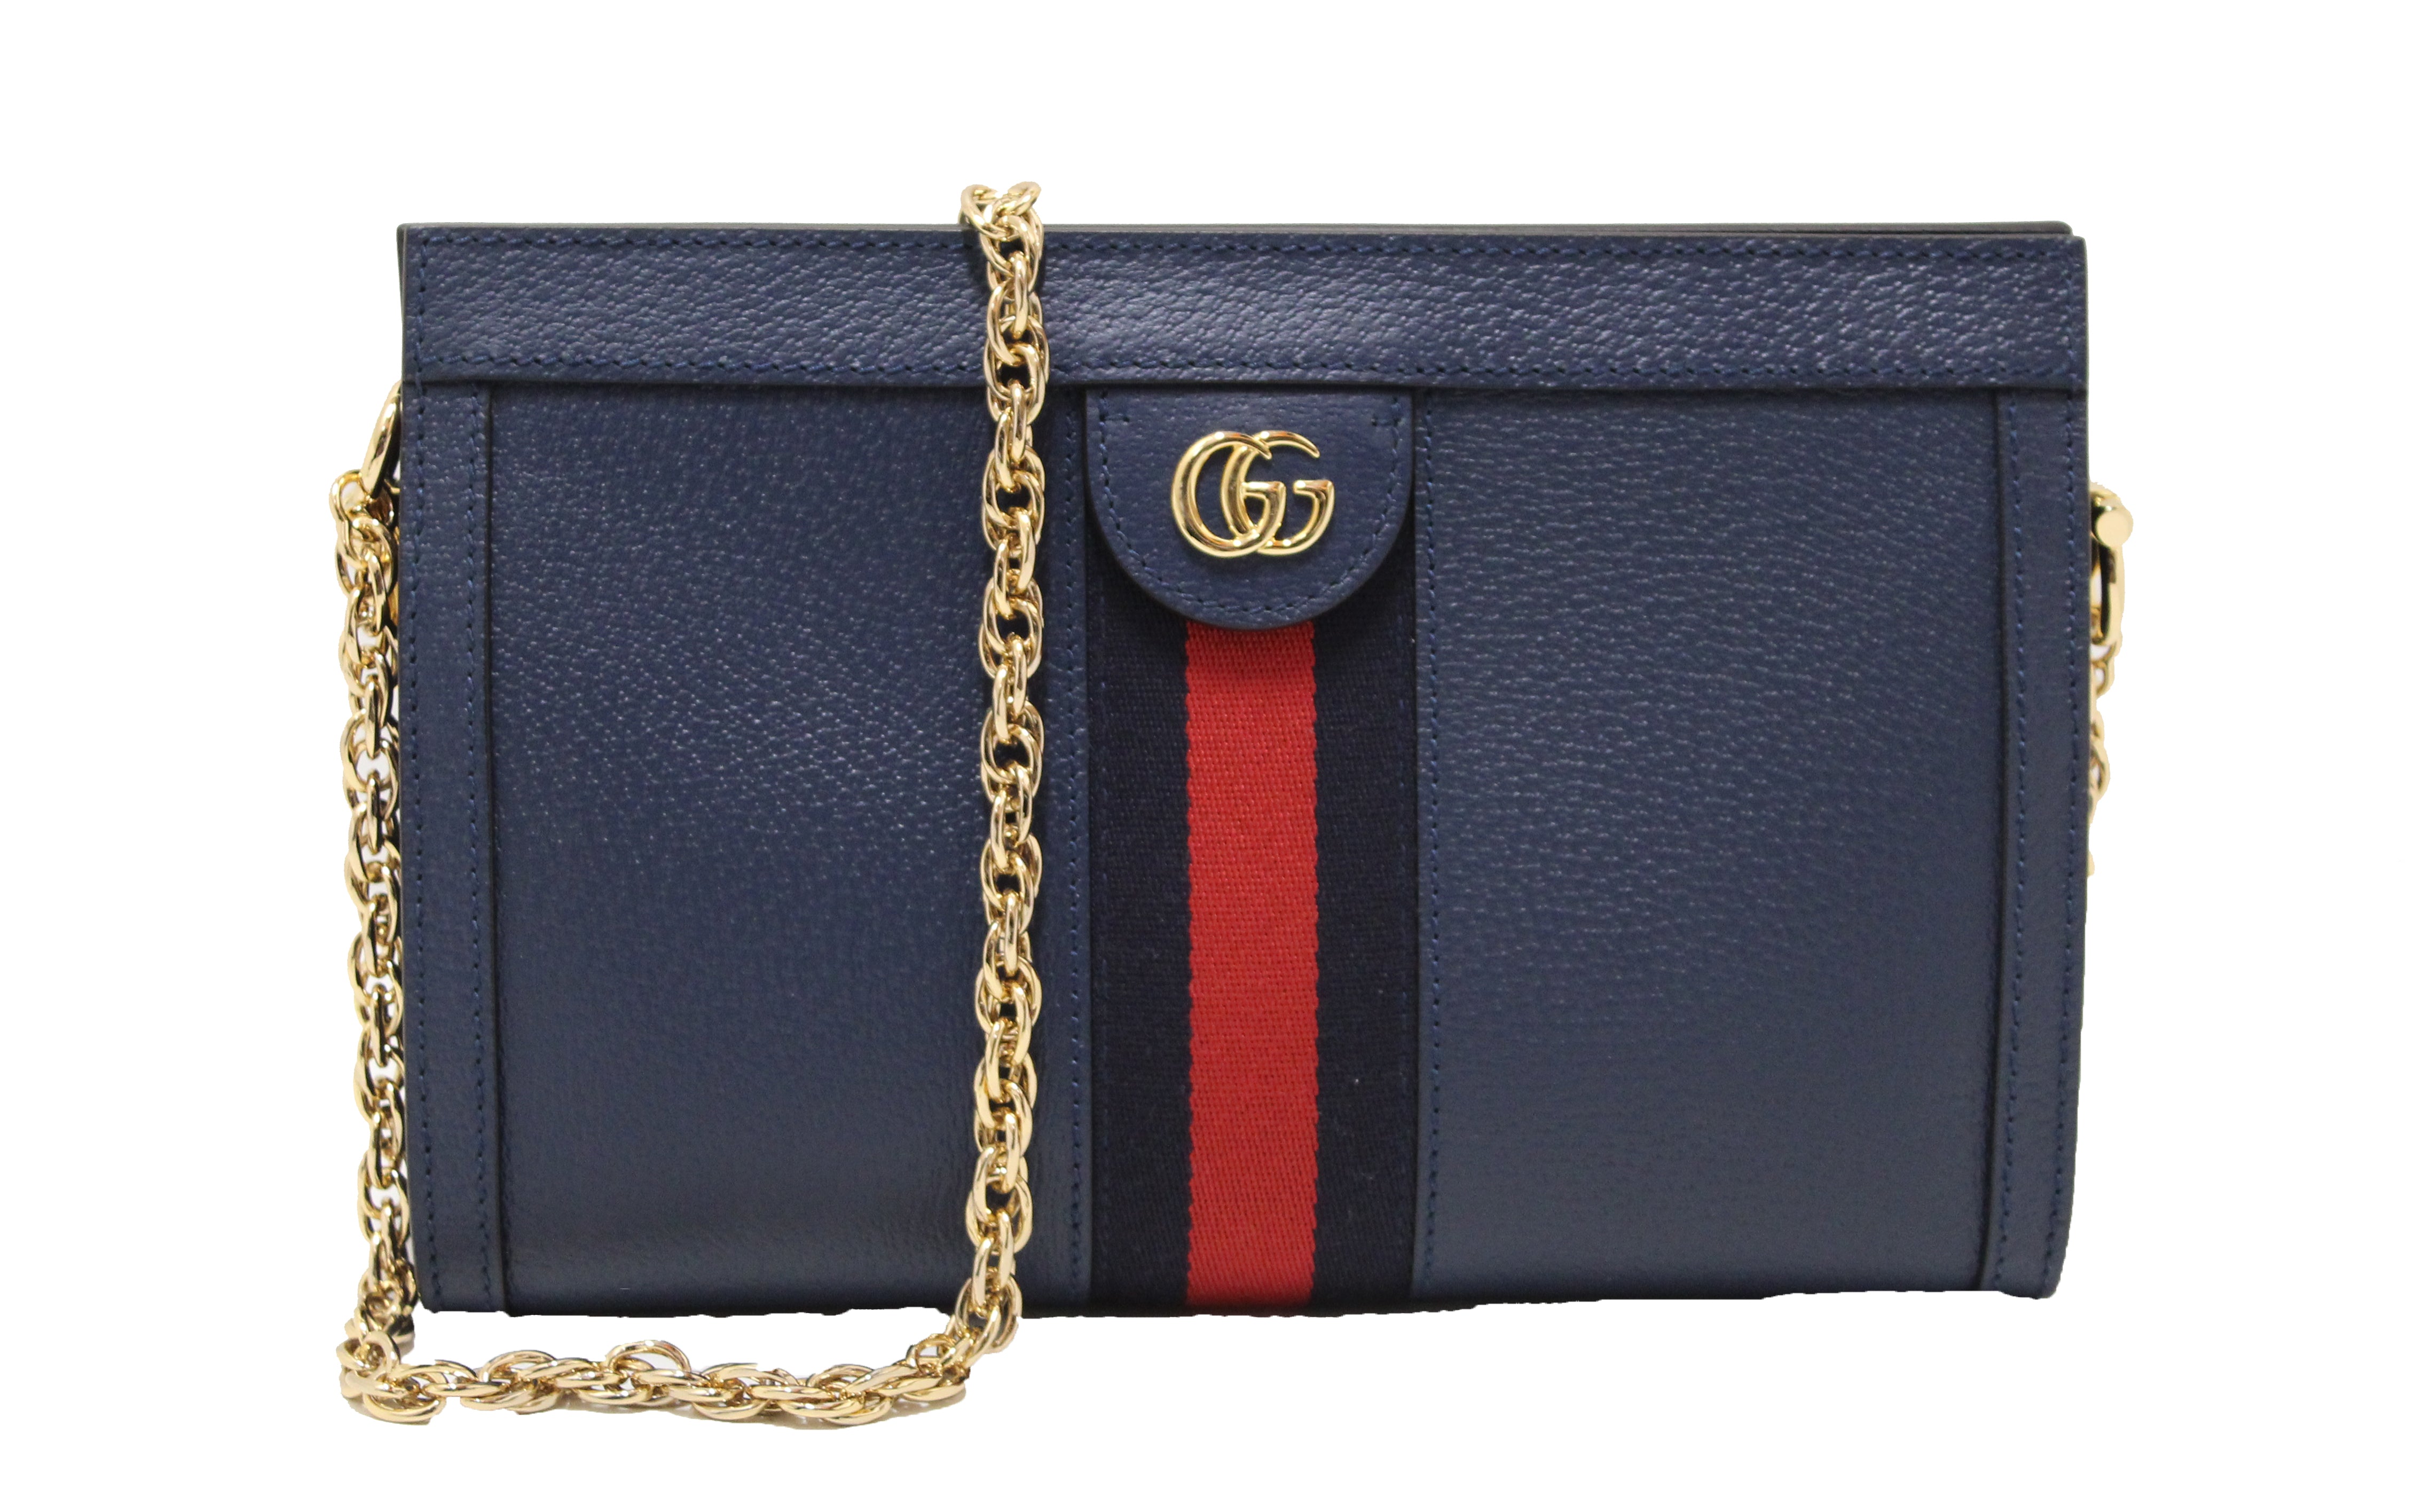 Authentic Gucci Ophidia Blue Leather Small Shoulder Bag